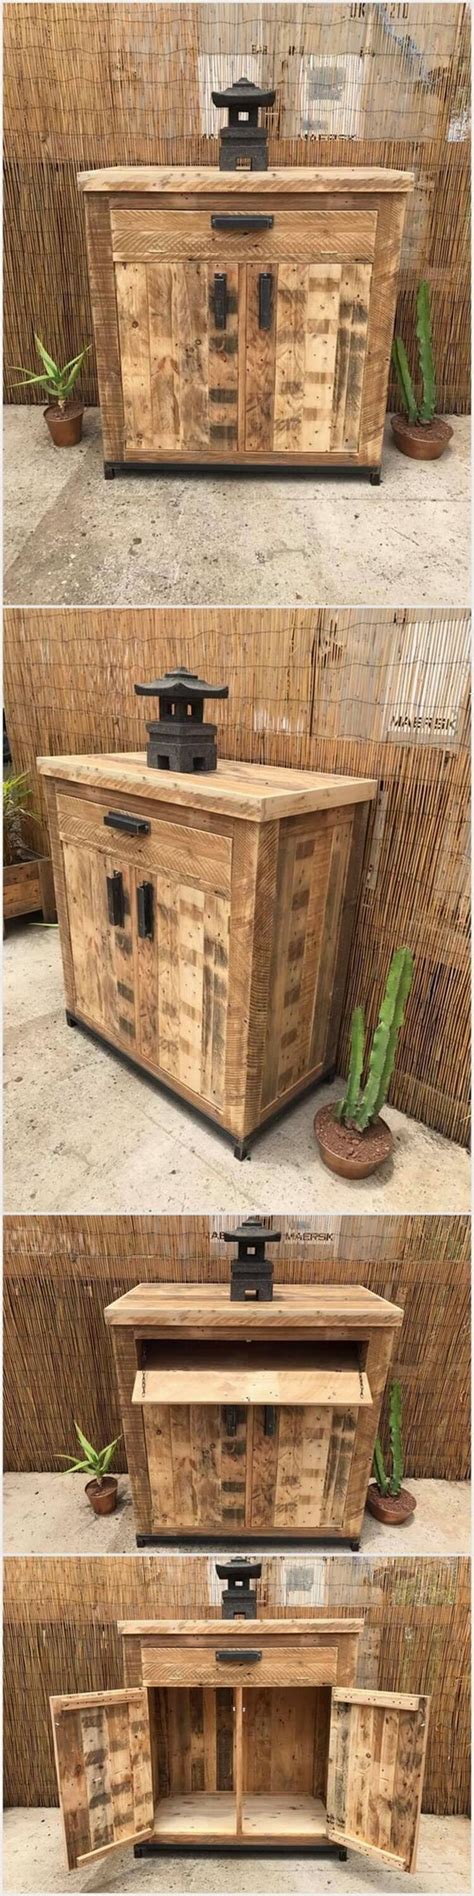 Wood Pallet Cabinet Pallet Wood Projects